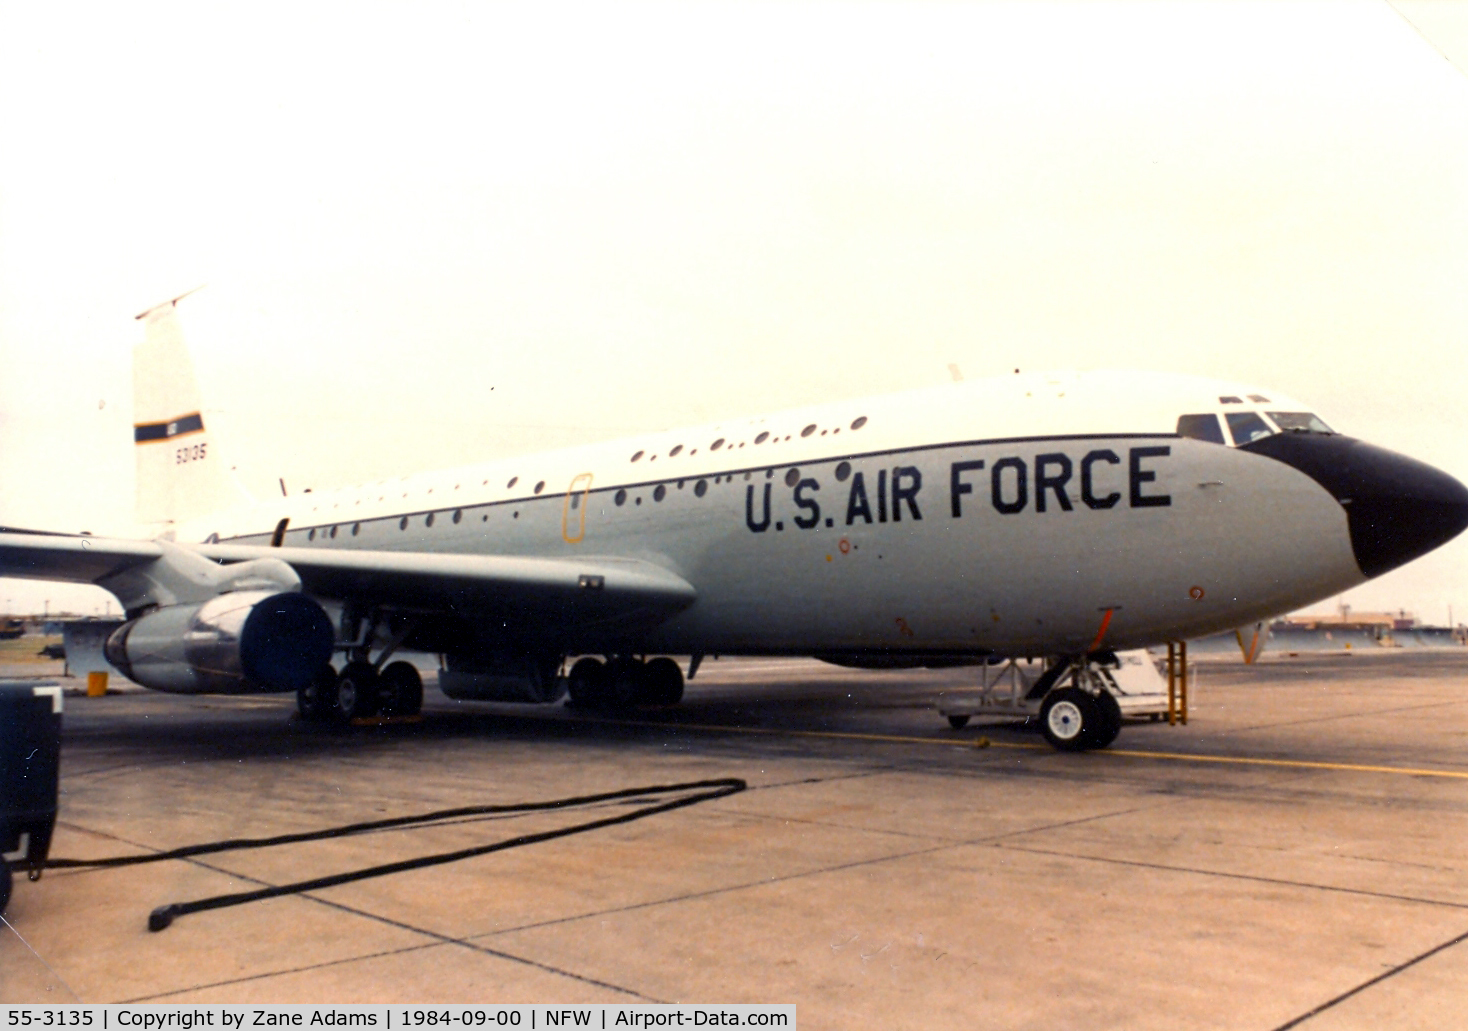 55-3135, 1955 Boeing NKC-135E Stratotanker C/N 17251, NKC-135E at Carswell AFB open house....this aircraft was reported to be the second oldest USAF aircraft when retired in 2004